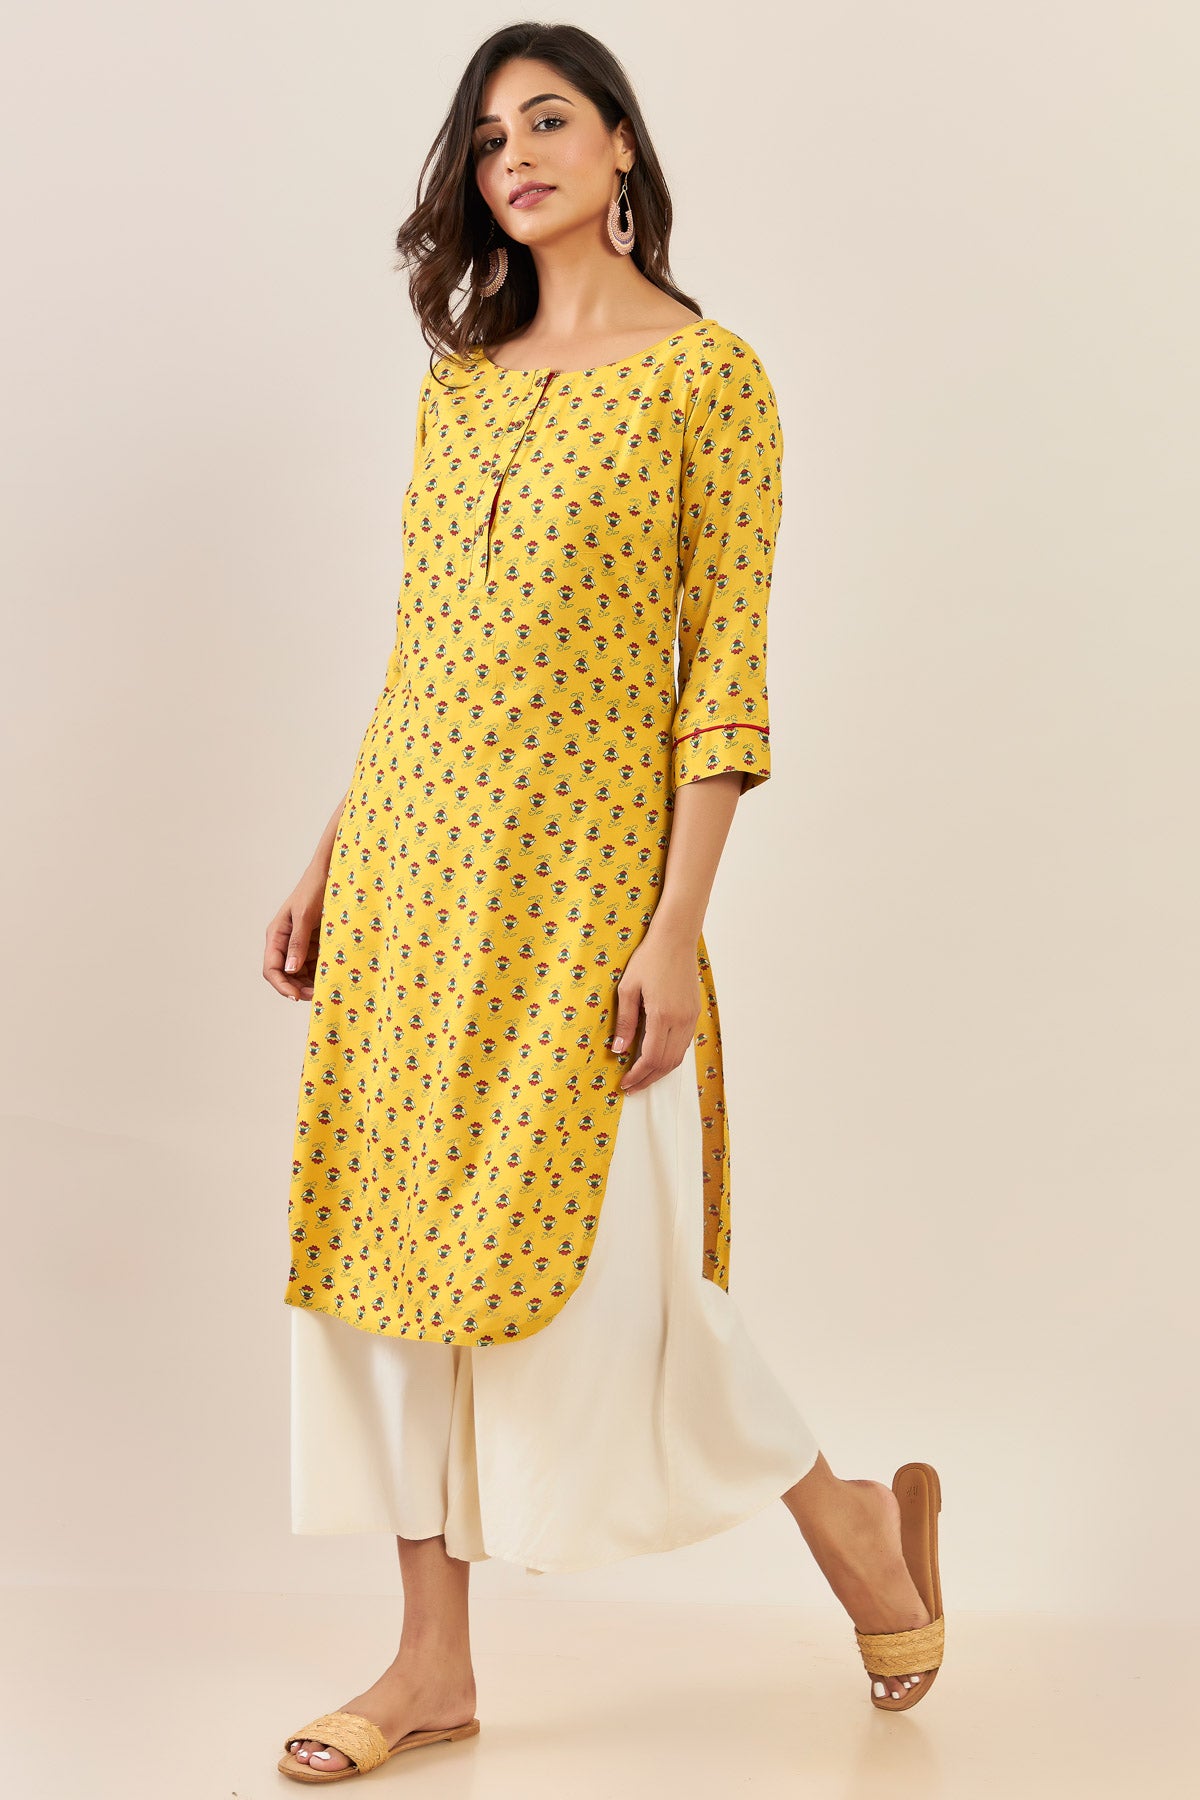 All Over Floral Printed Kurta - Yellow